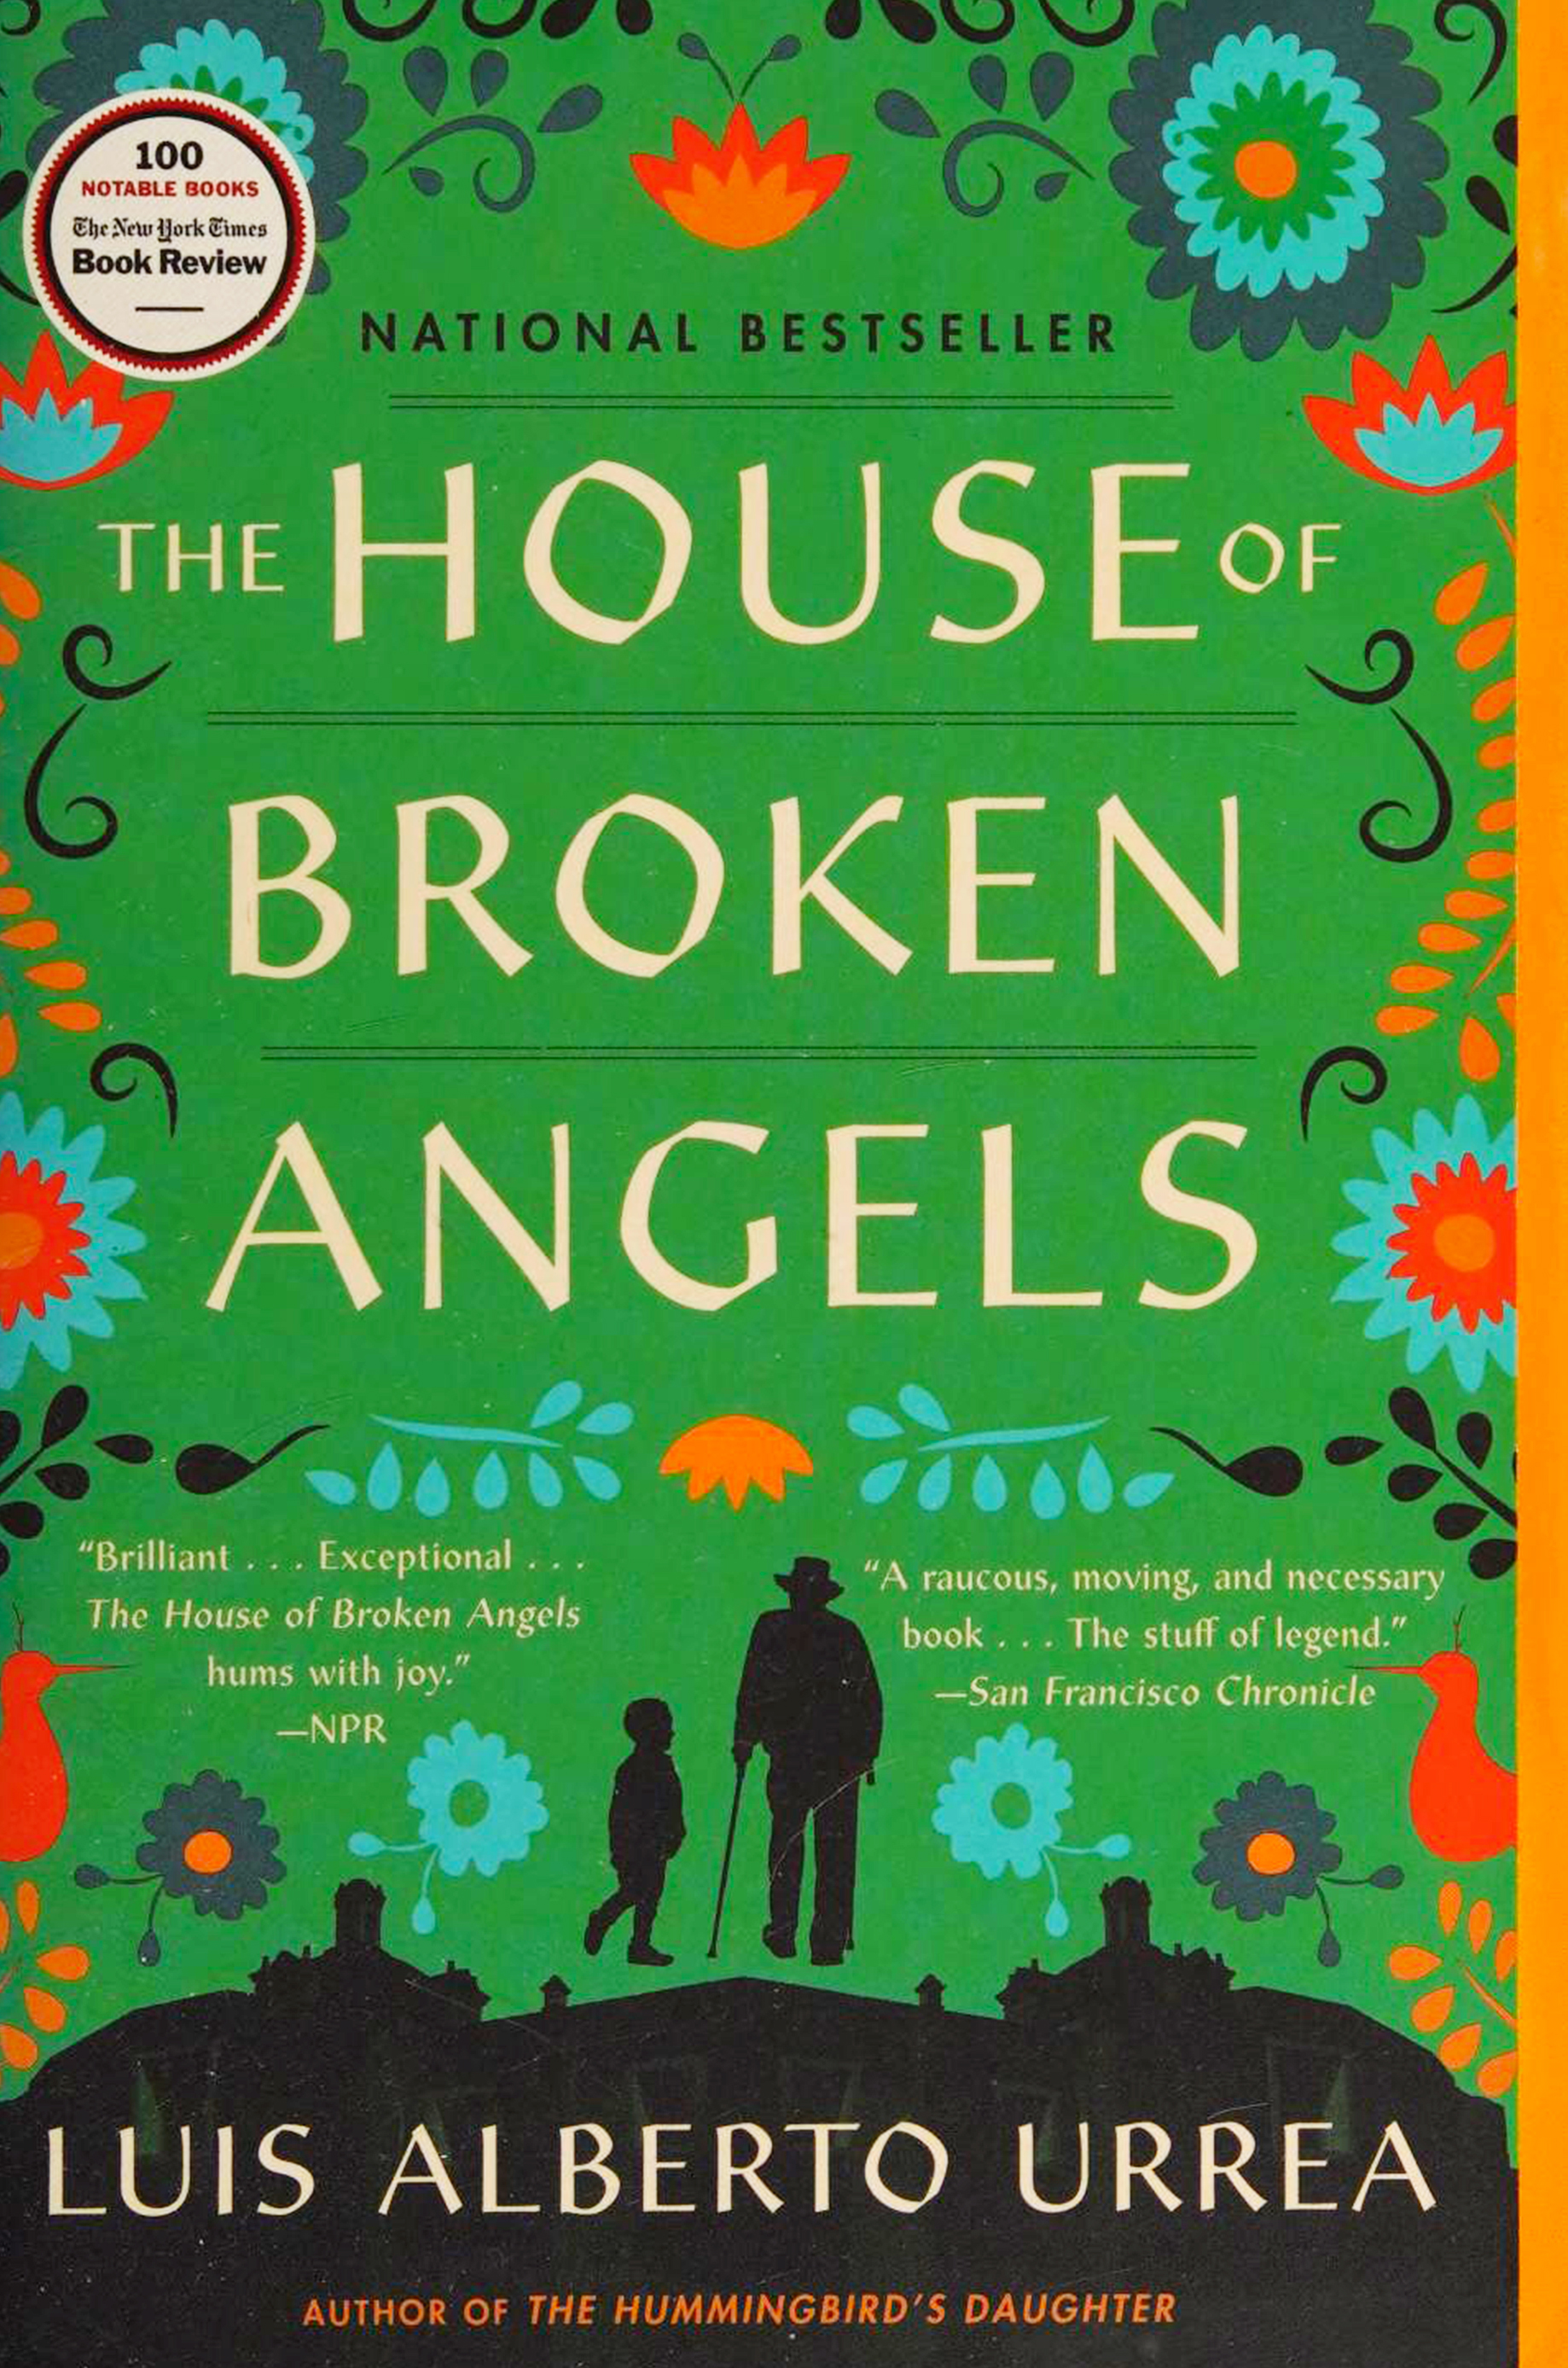 The House of Broken Angels ” by Luis Alberto Urrea (Back Bay Books)